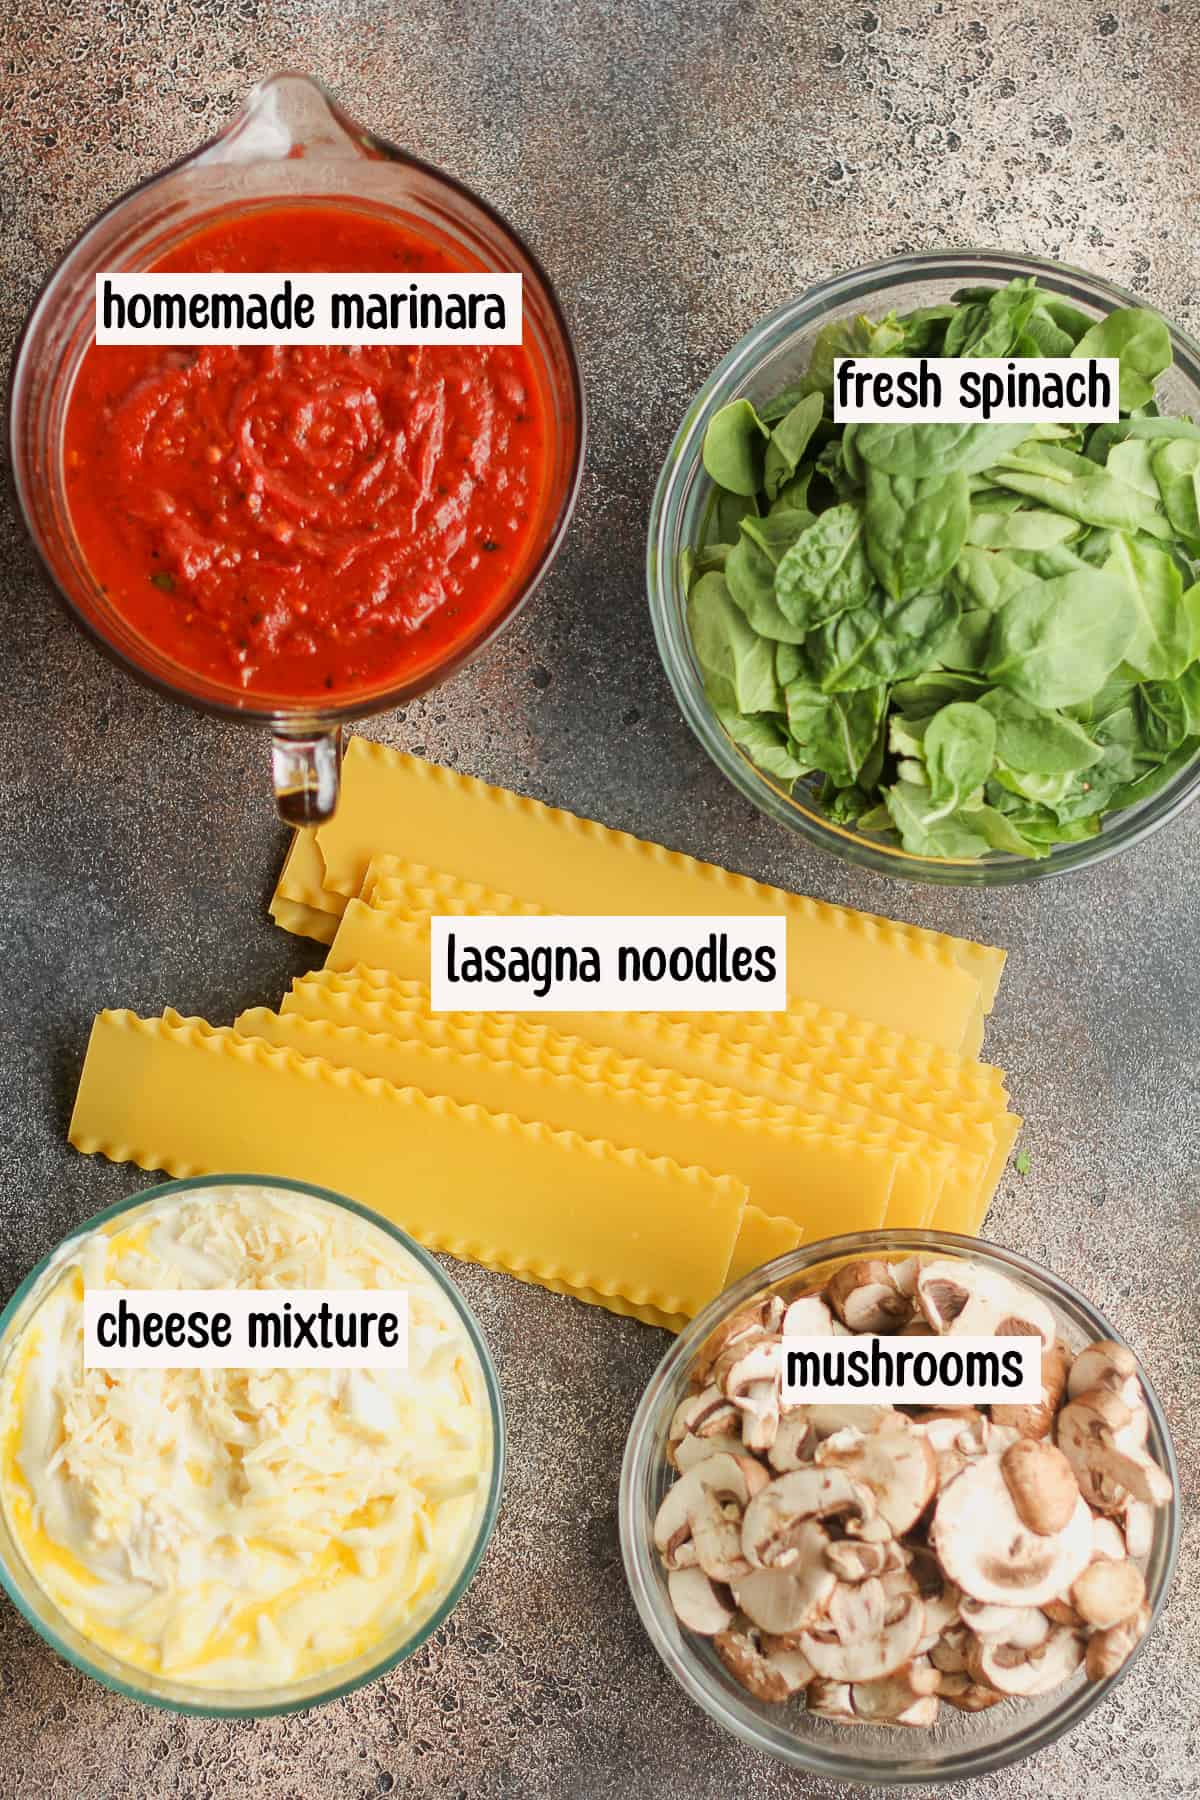 The ingredients for the lasagna.